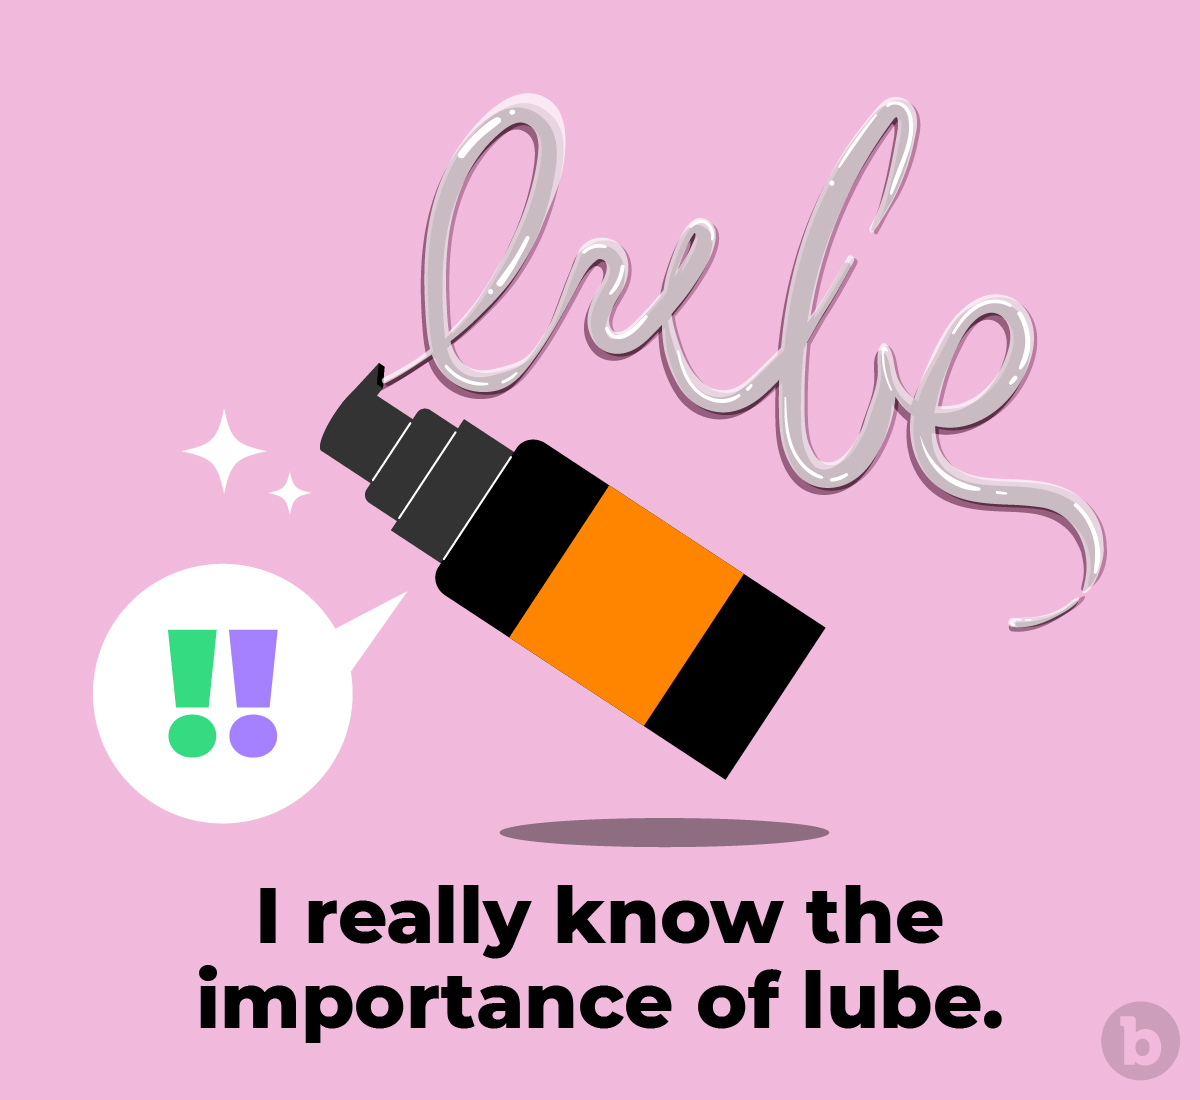 Lube is absolutely essential to anal play